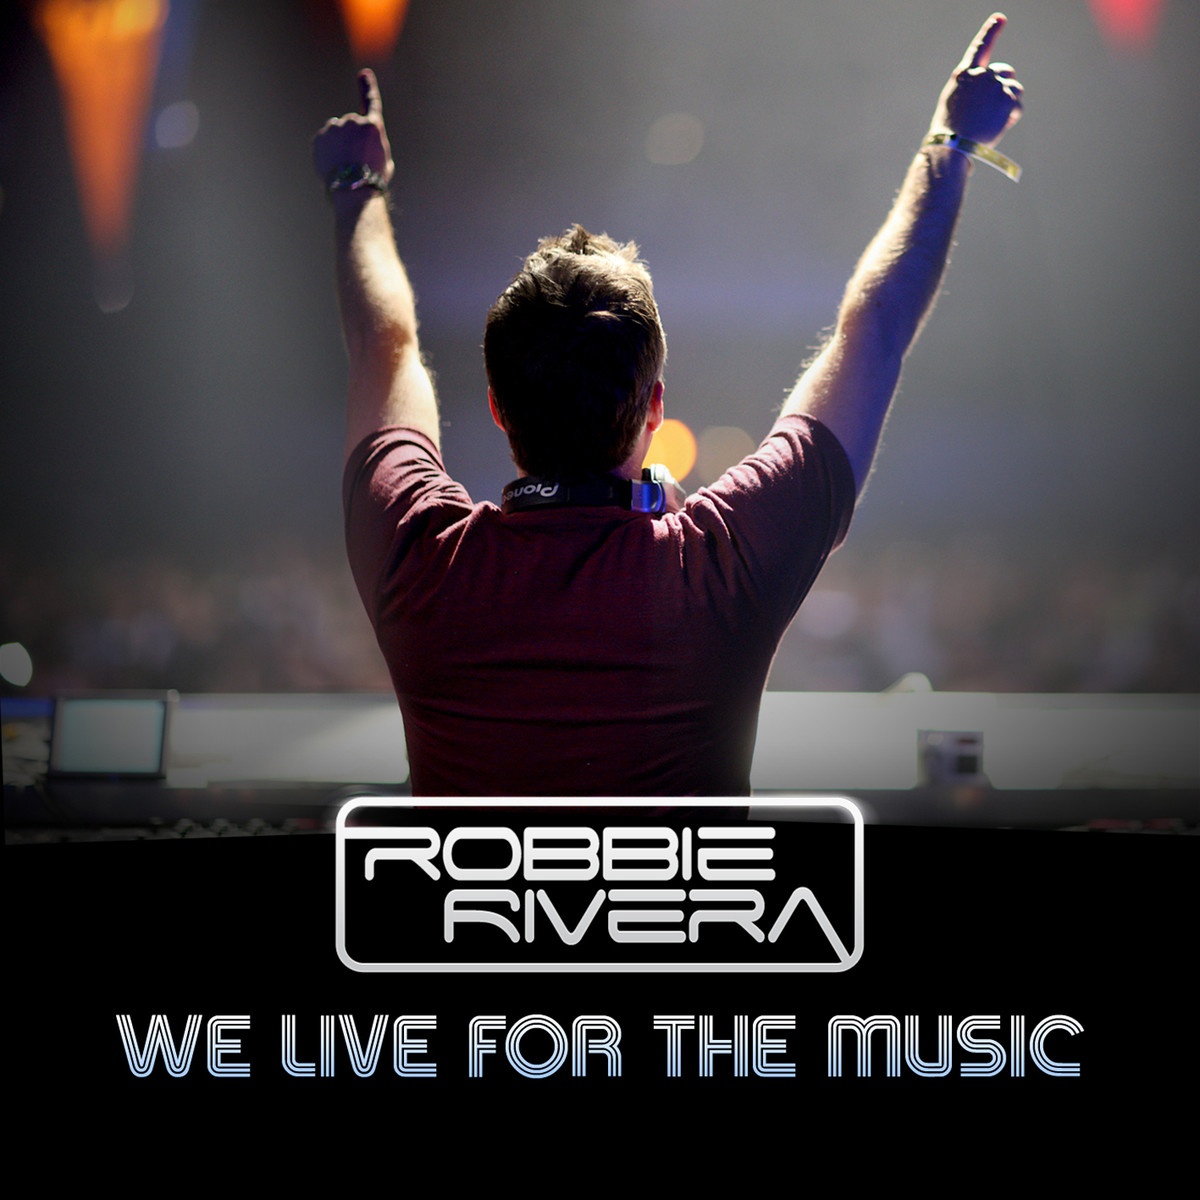 We Live For The Music - Juanjo Martin Remix